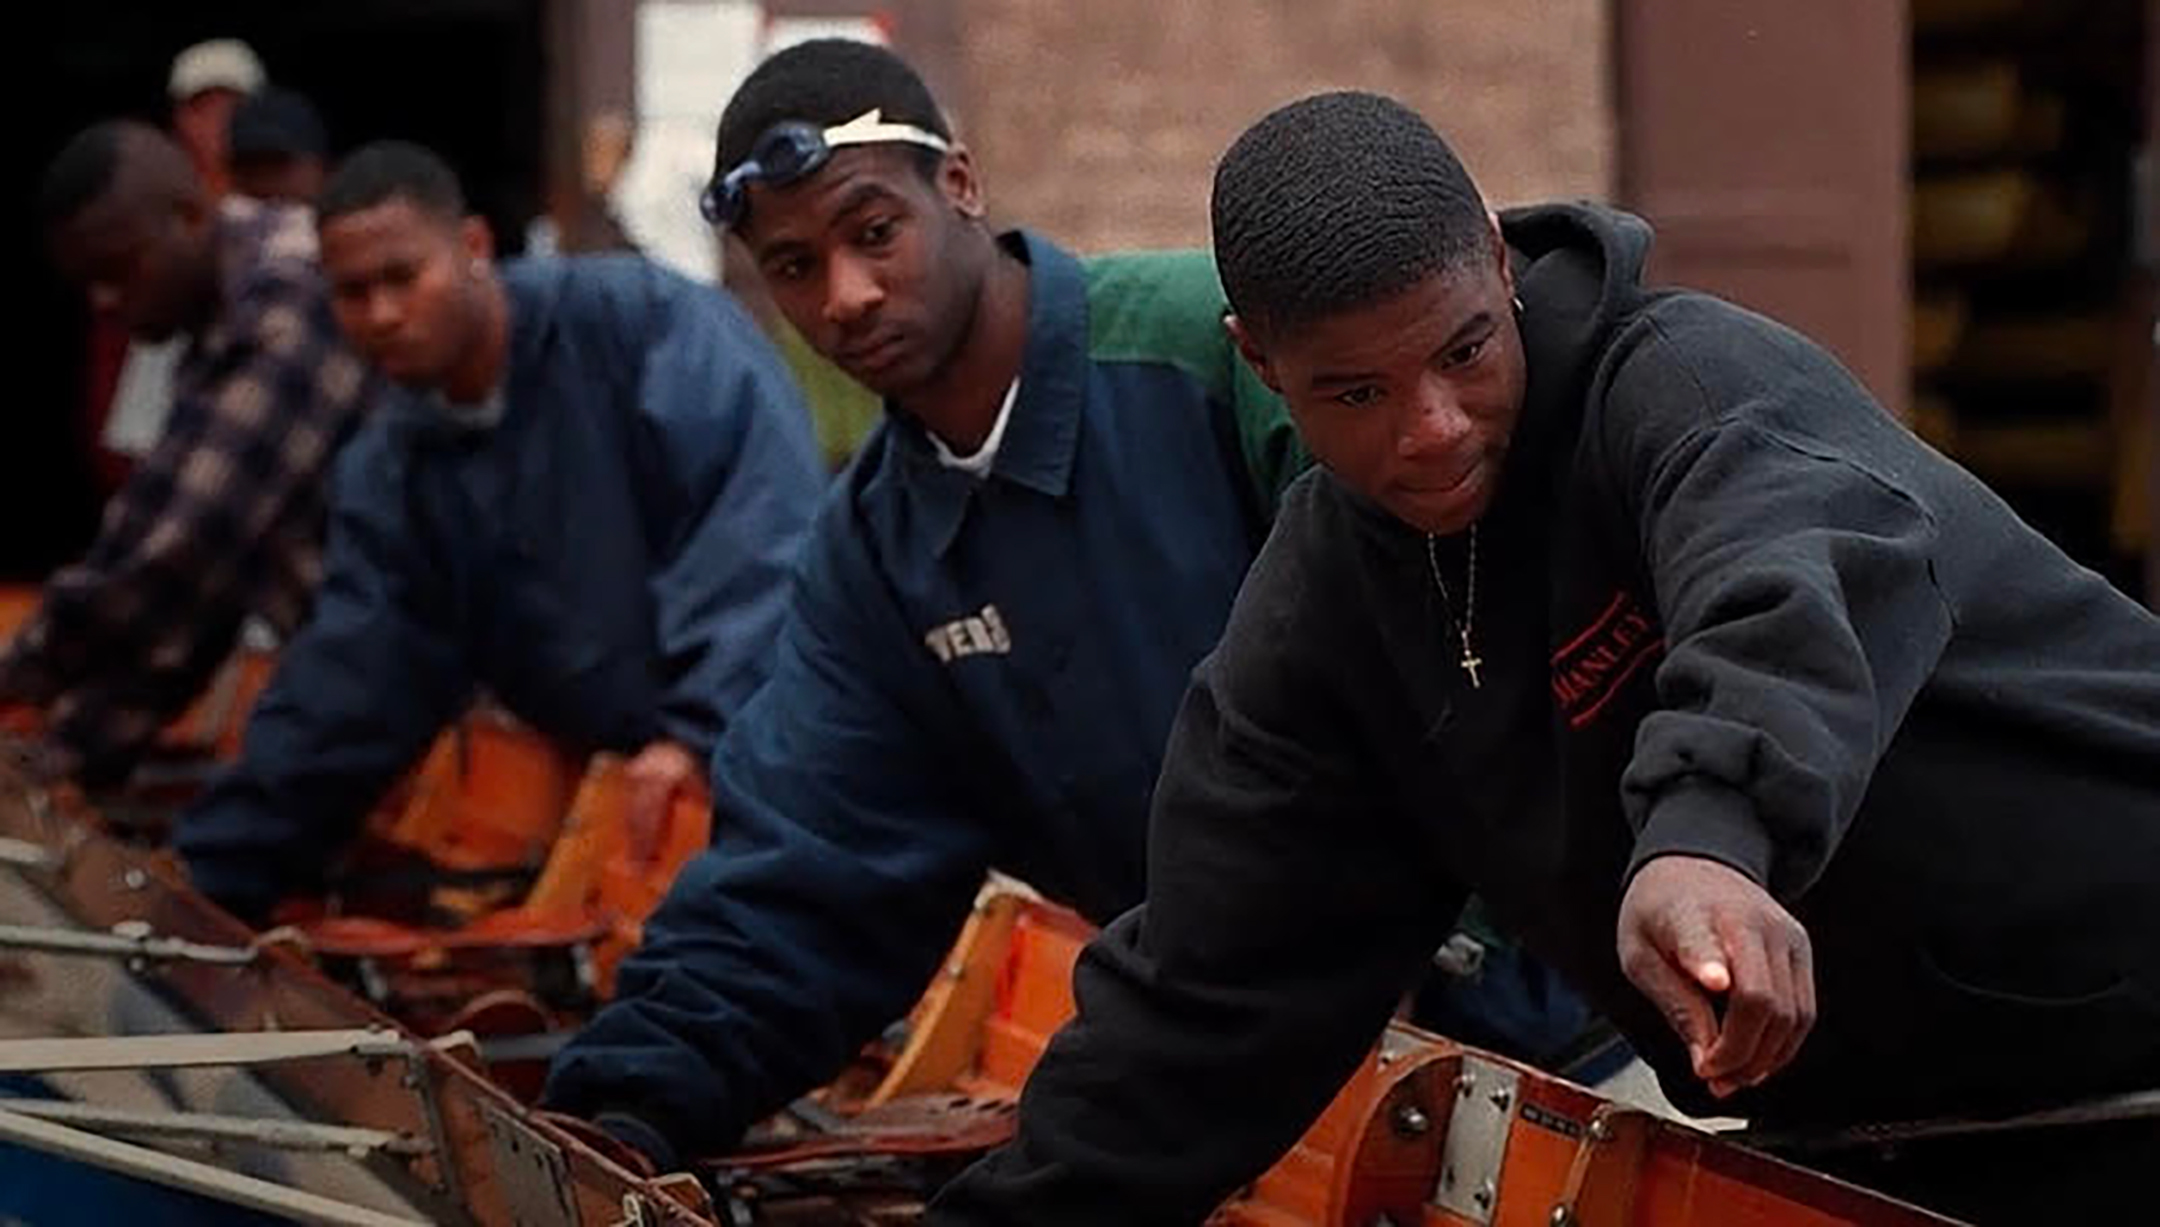 A group of young black men work on a boat for their crew team